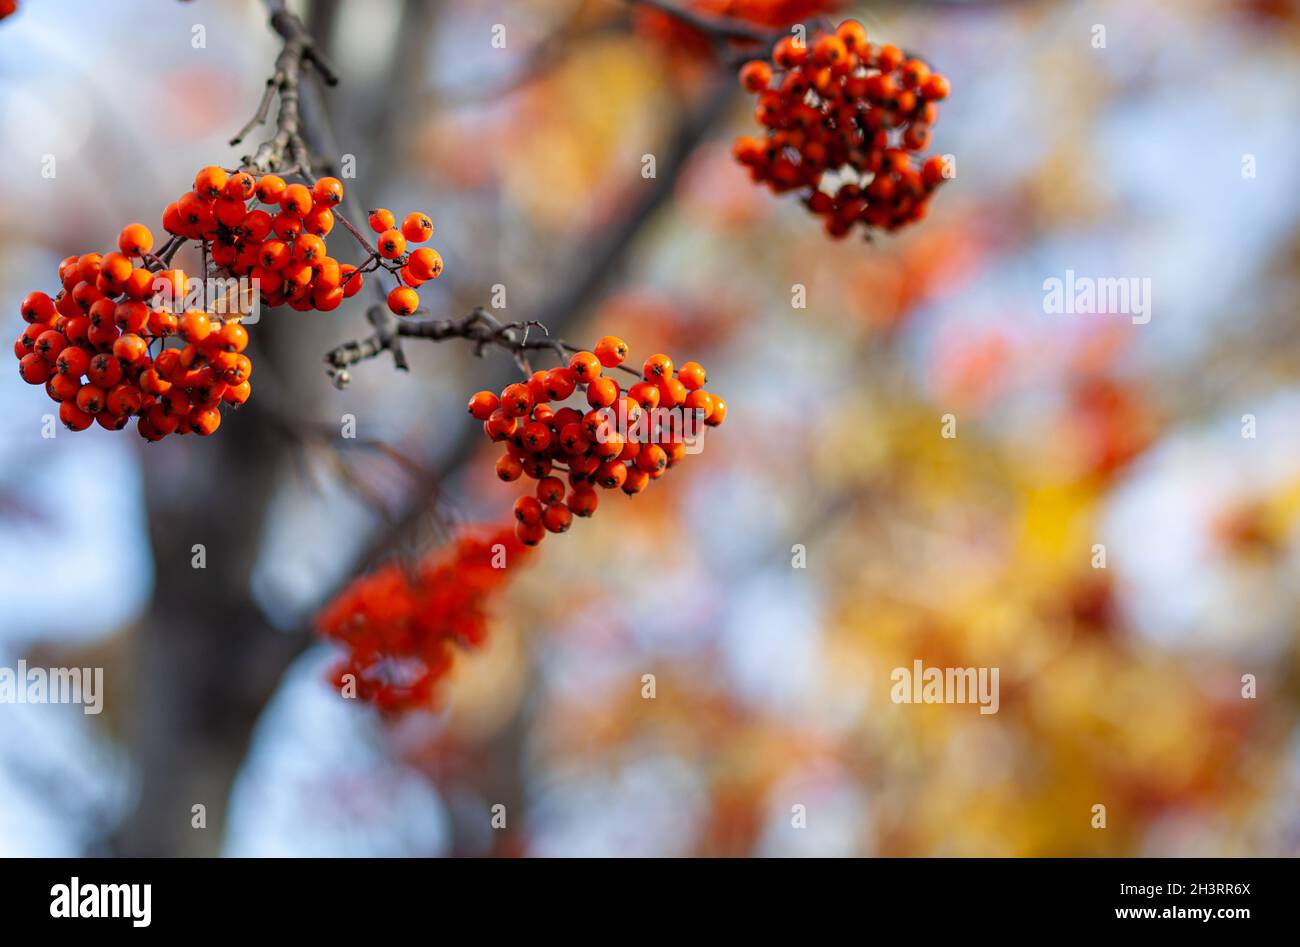 Berries of mountain ash branches are red on a blurry autumn background Stock Photo